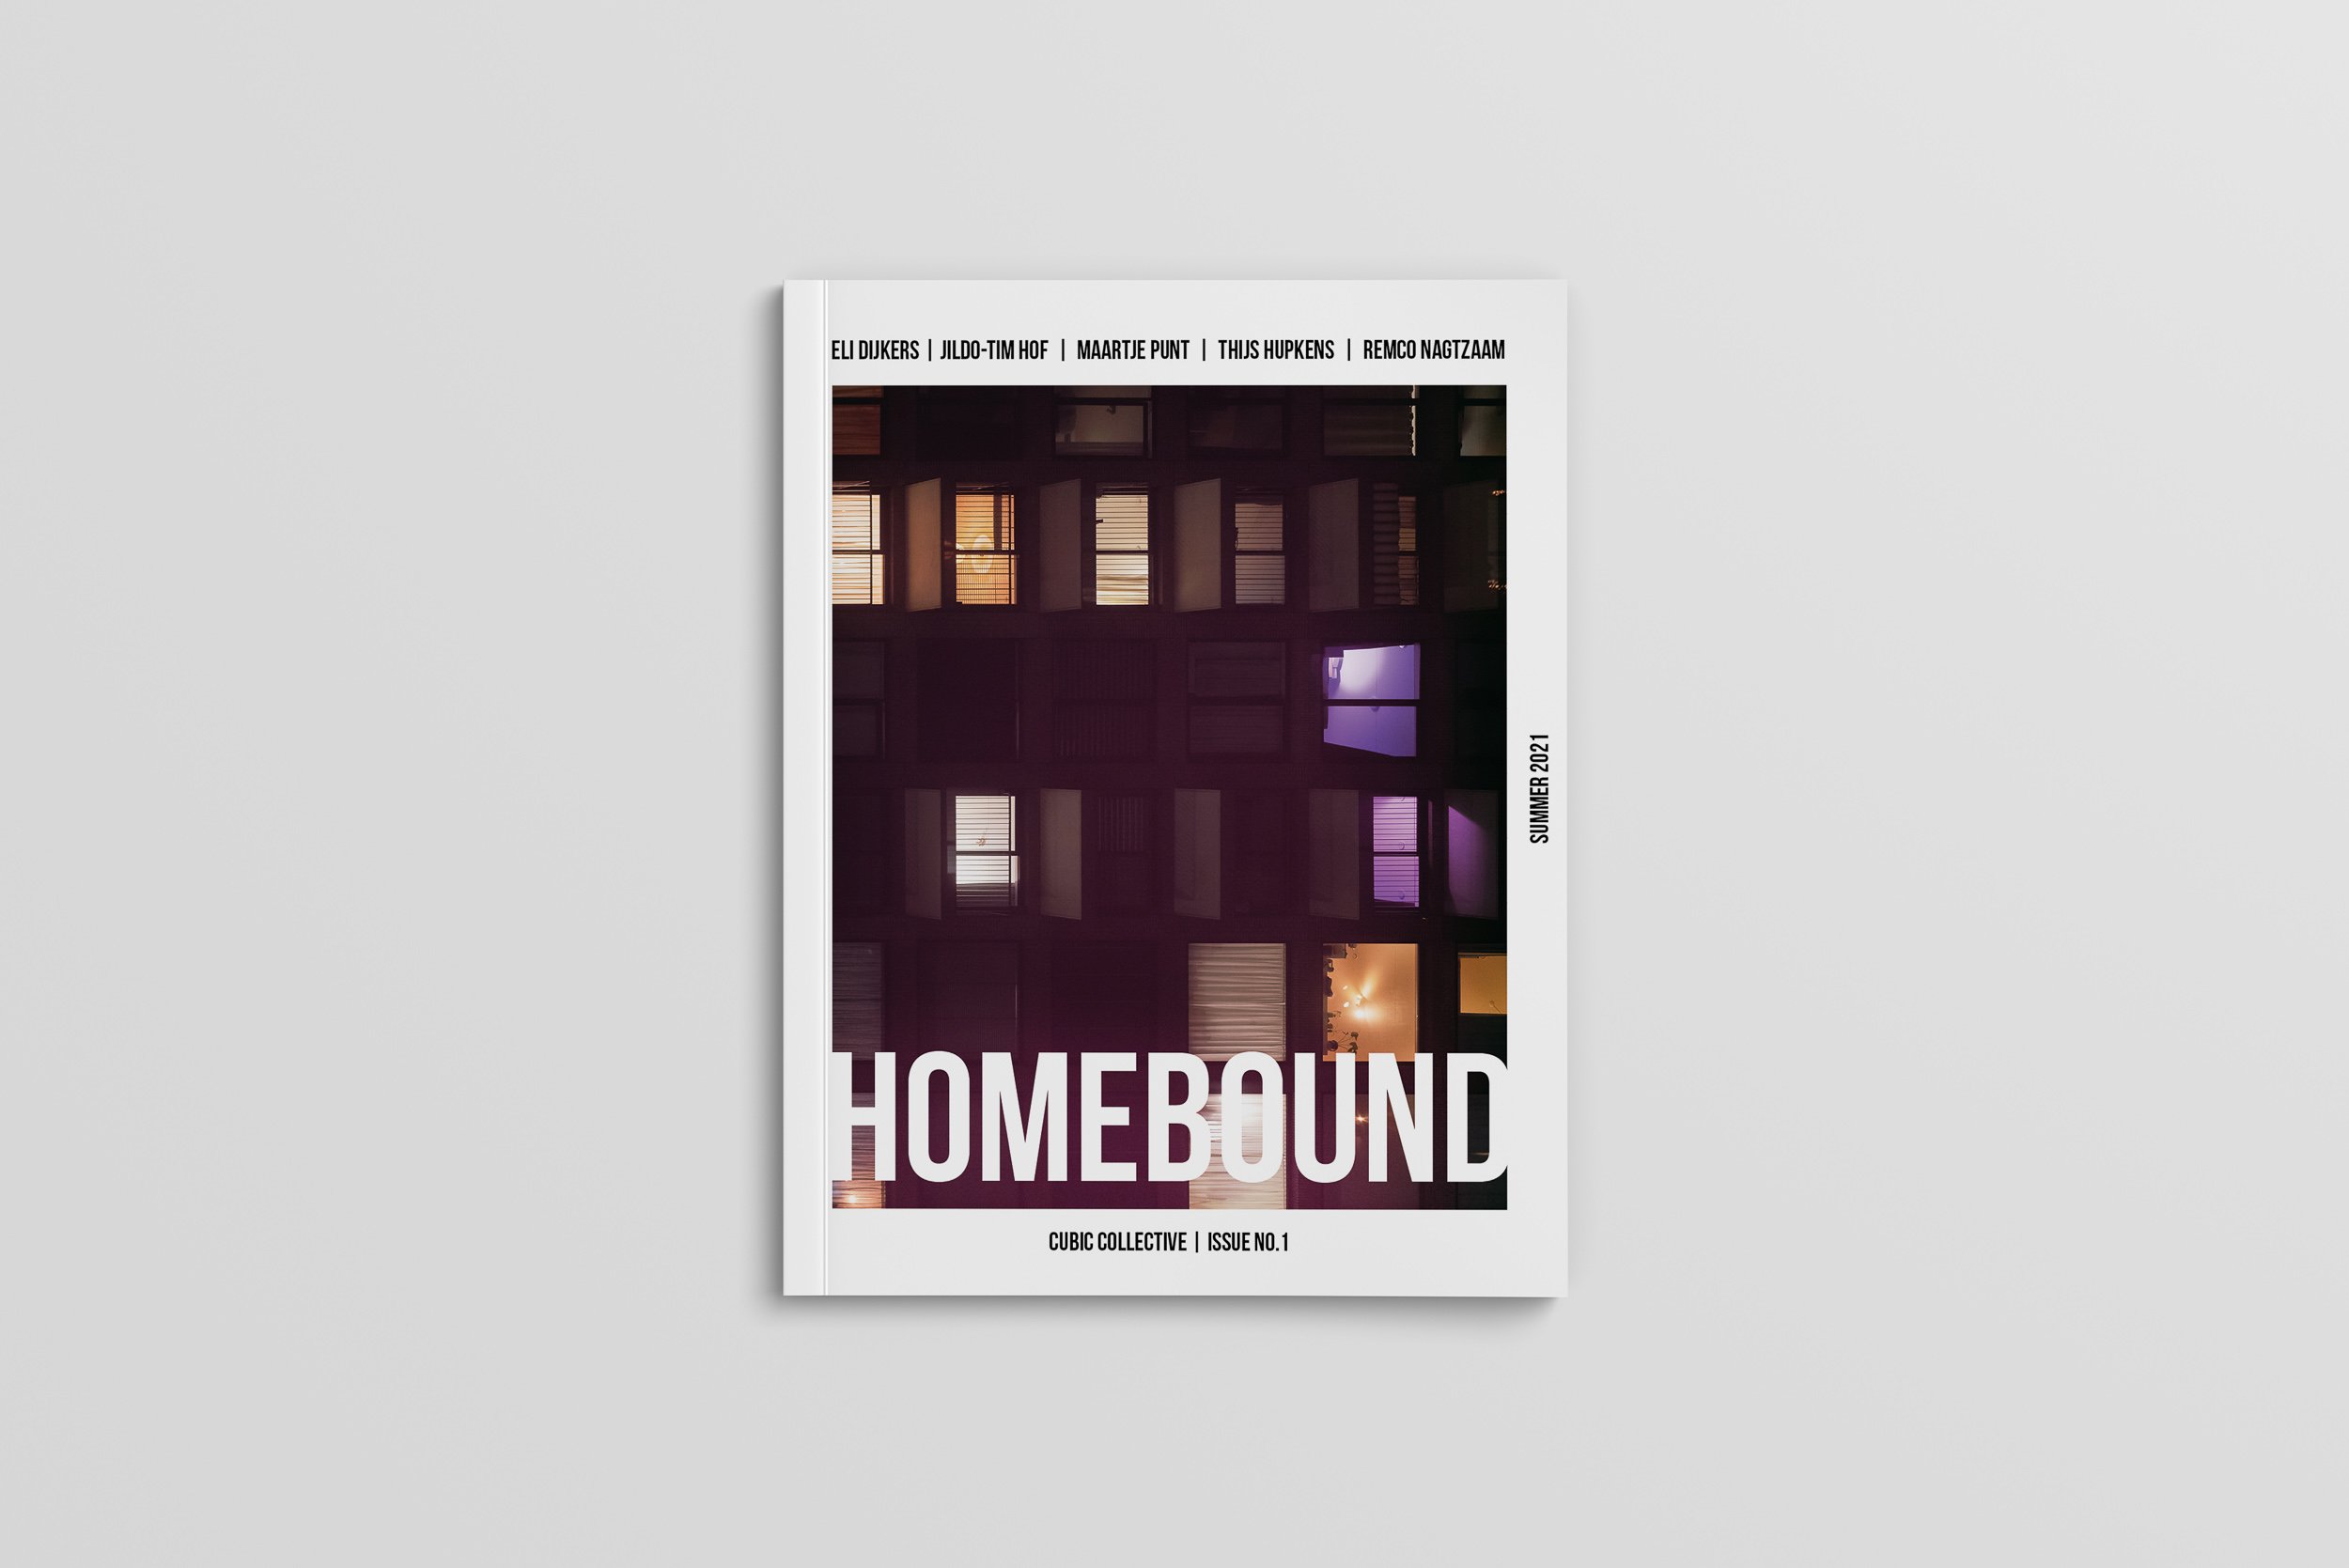  'Seconds' is part of 'Homebound' magazine by Cubic Collective. As a group of five photographers, we set out to discover different European cities and present our combined perspectives to you. The pandemic in 2020 and 2021 forced us to think differen